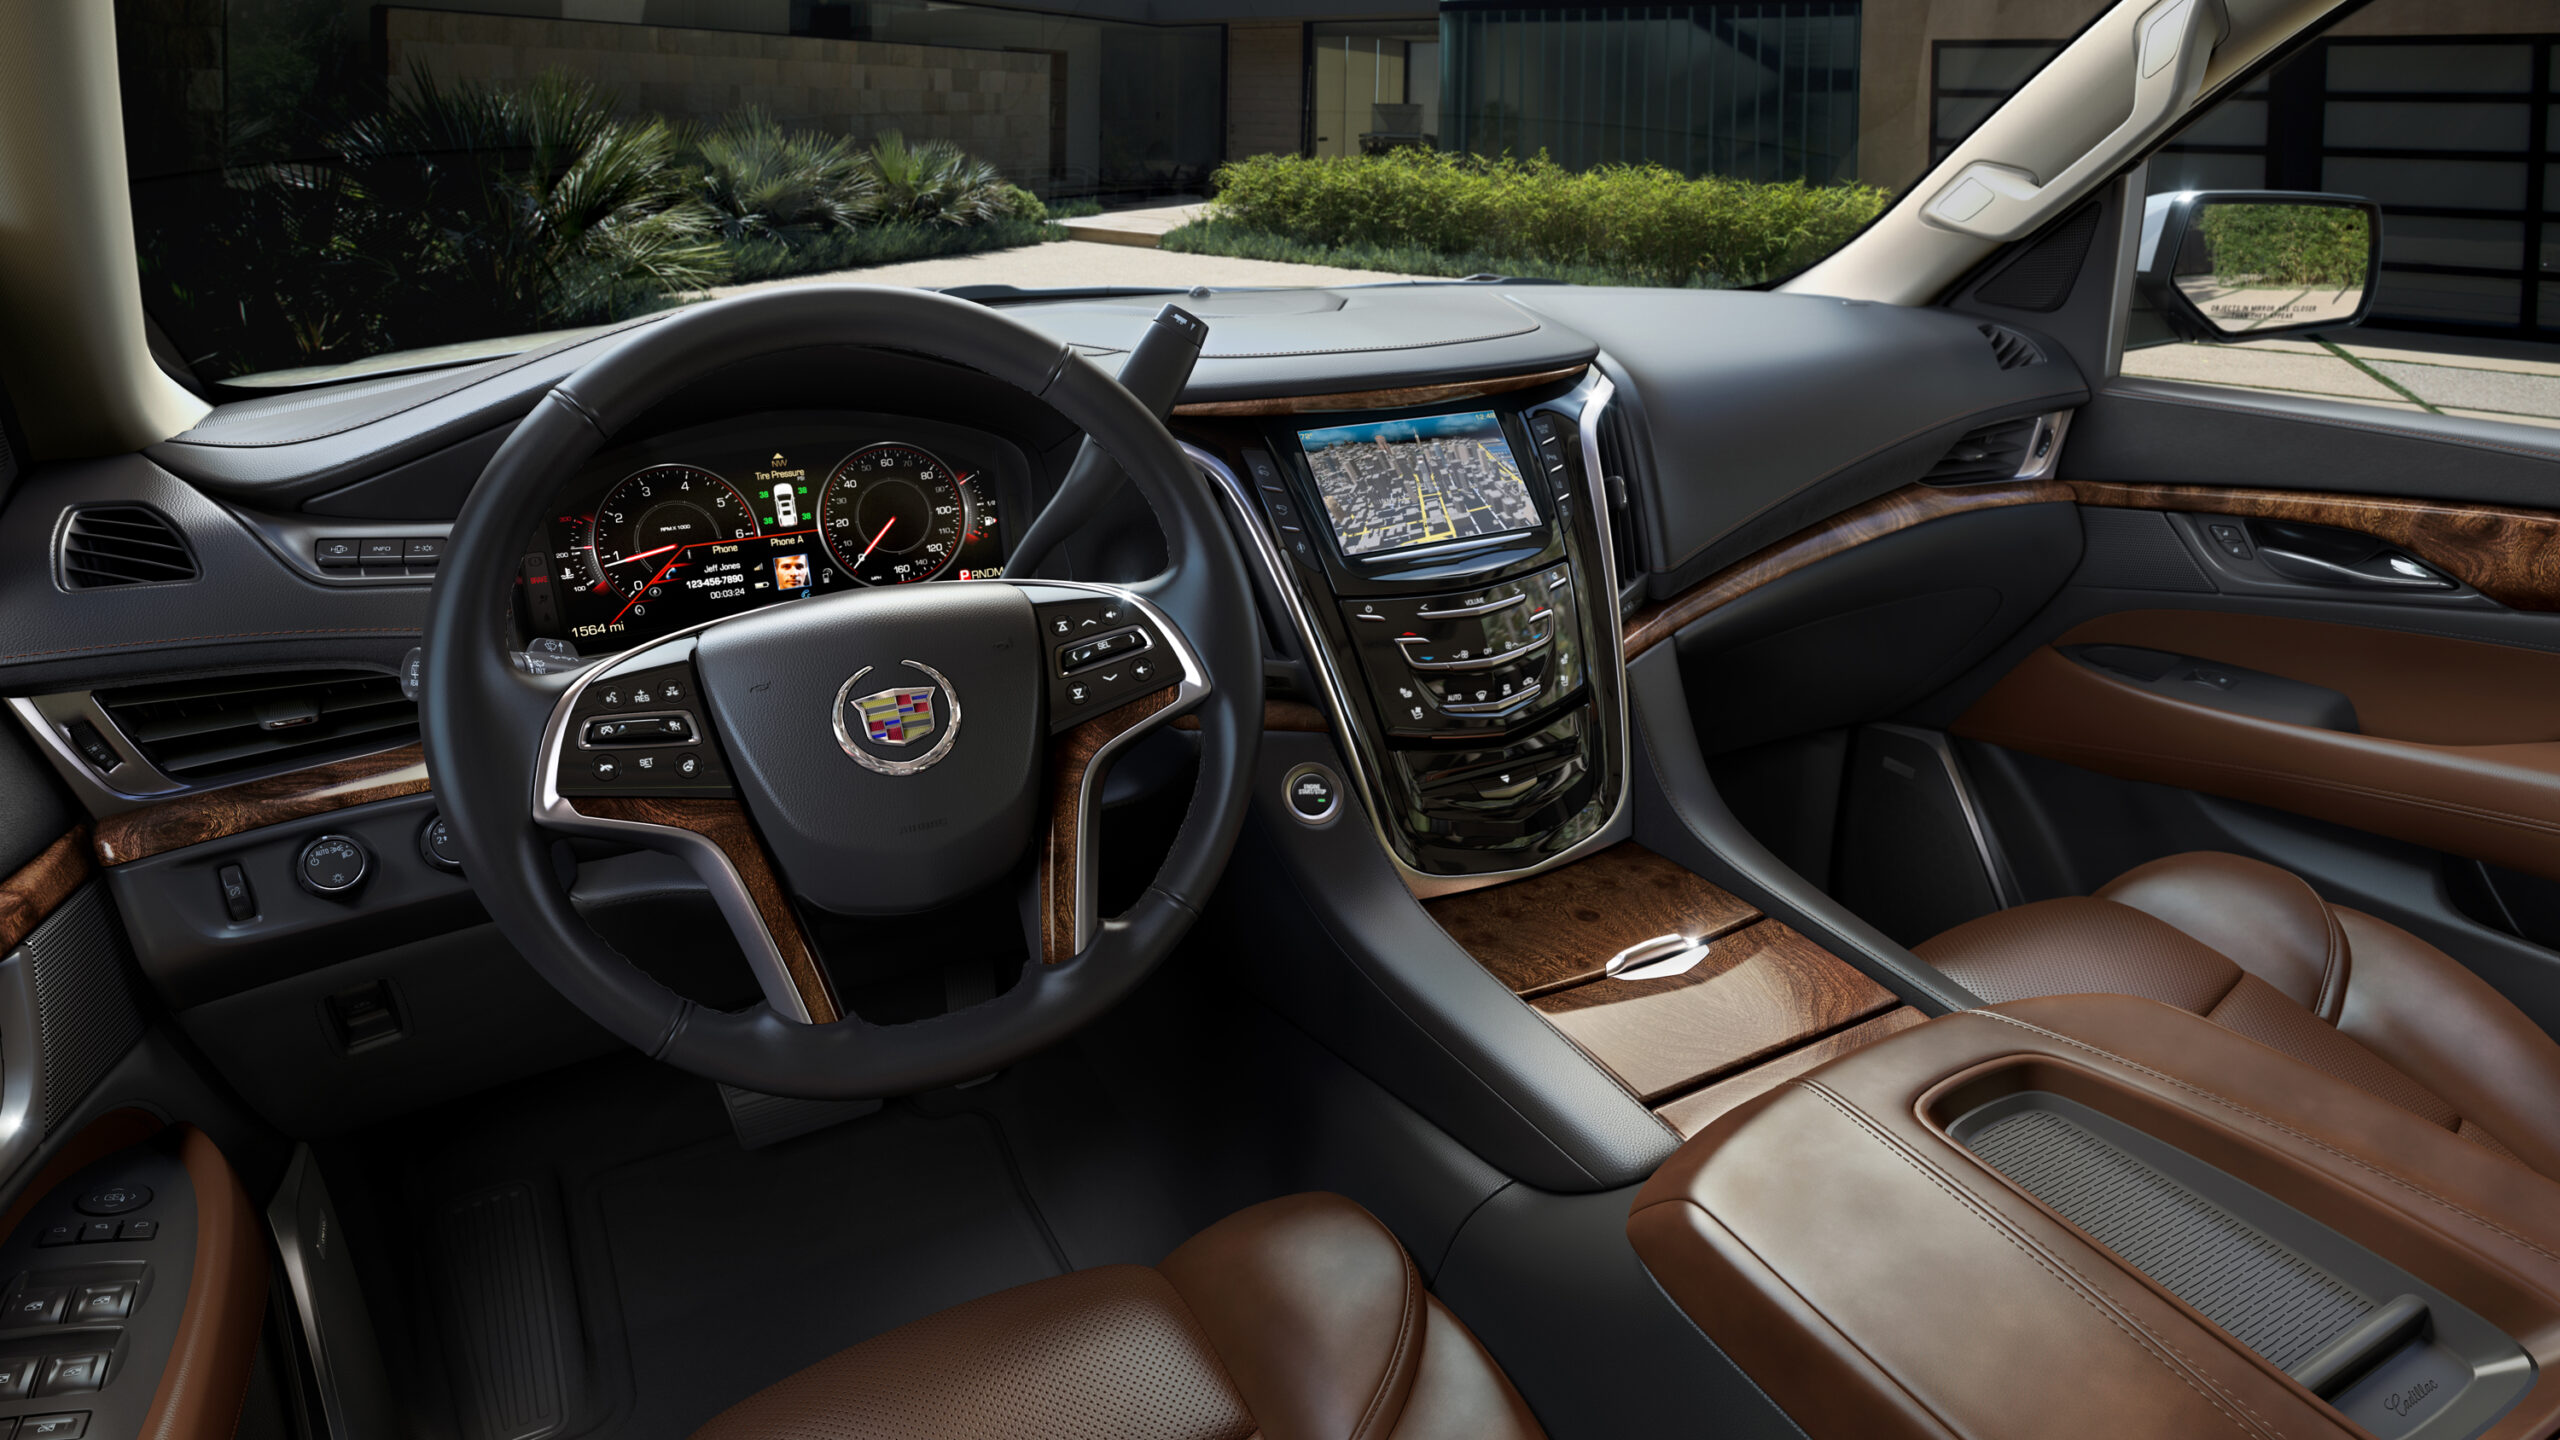 CUE, Cadillac’s advanced system for connectivity and control, is standard on the Escalade, featuring state-of-the-art voice recognition with touch controls common with the world’s most popular tablets and mobile devices. A standard 12.3-inch digital gauge cluster can be reconfigured with four themes and an available head-up display projects information onto the windshield.